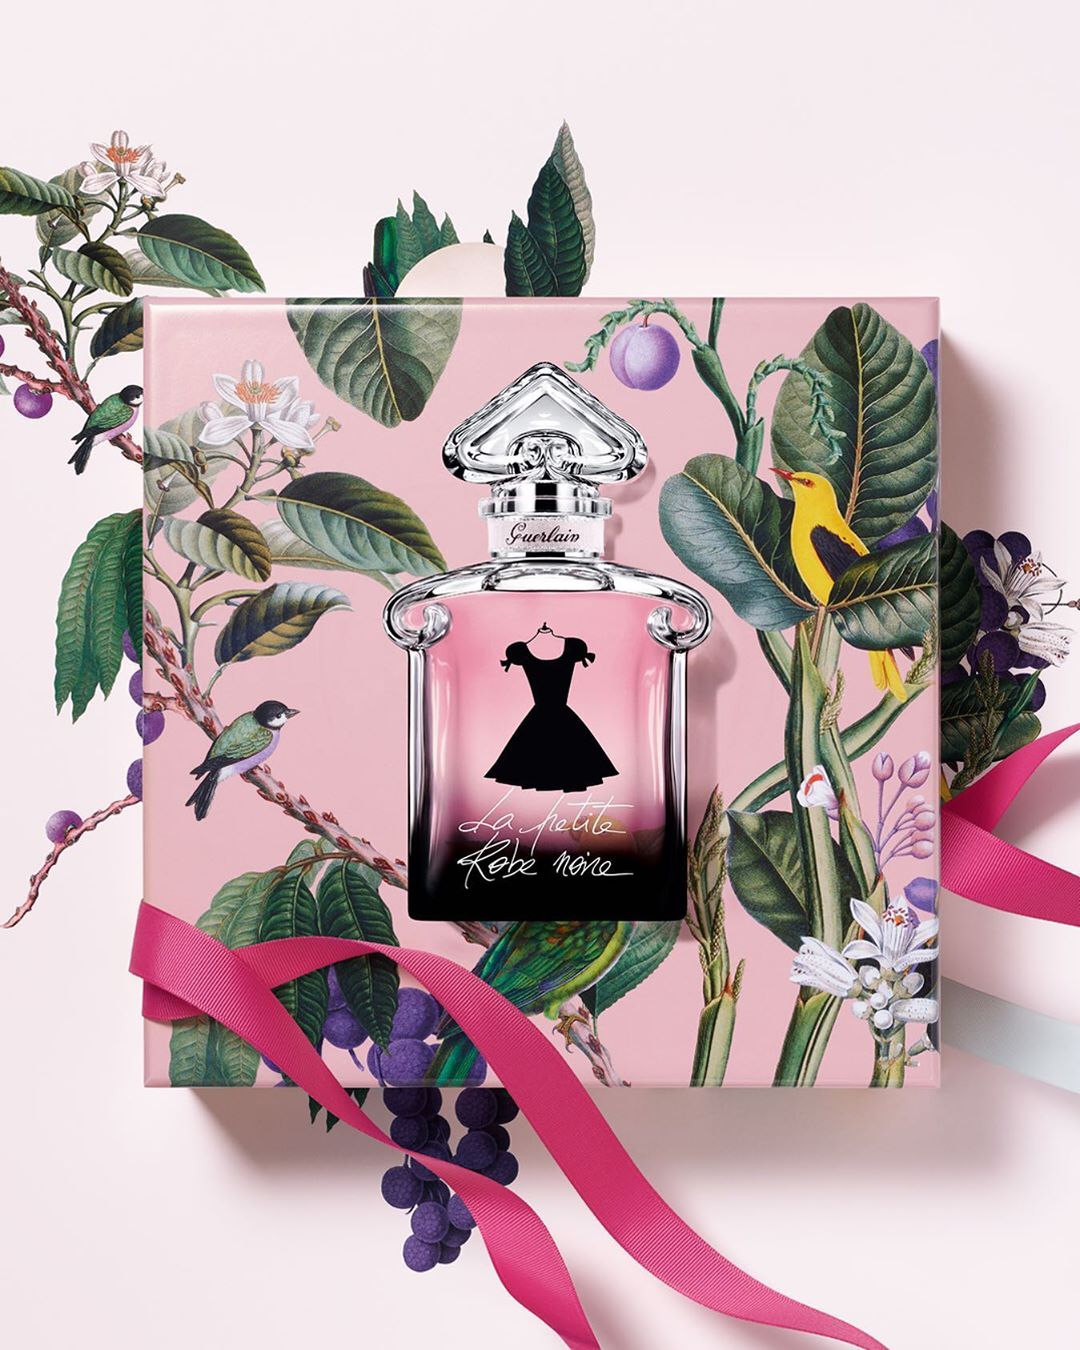 Guerlain - Chic, glamorous, intense. The timeless little black dress is given an update with stunning artwork by Roxane Lagache, inspired by retro visual elements - a quirky twist on Guerlain's modern...